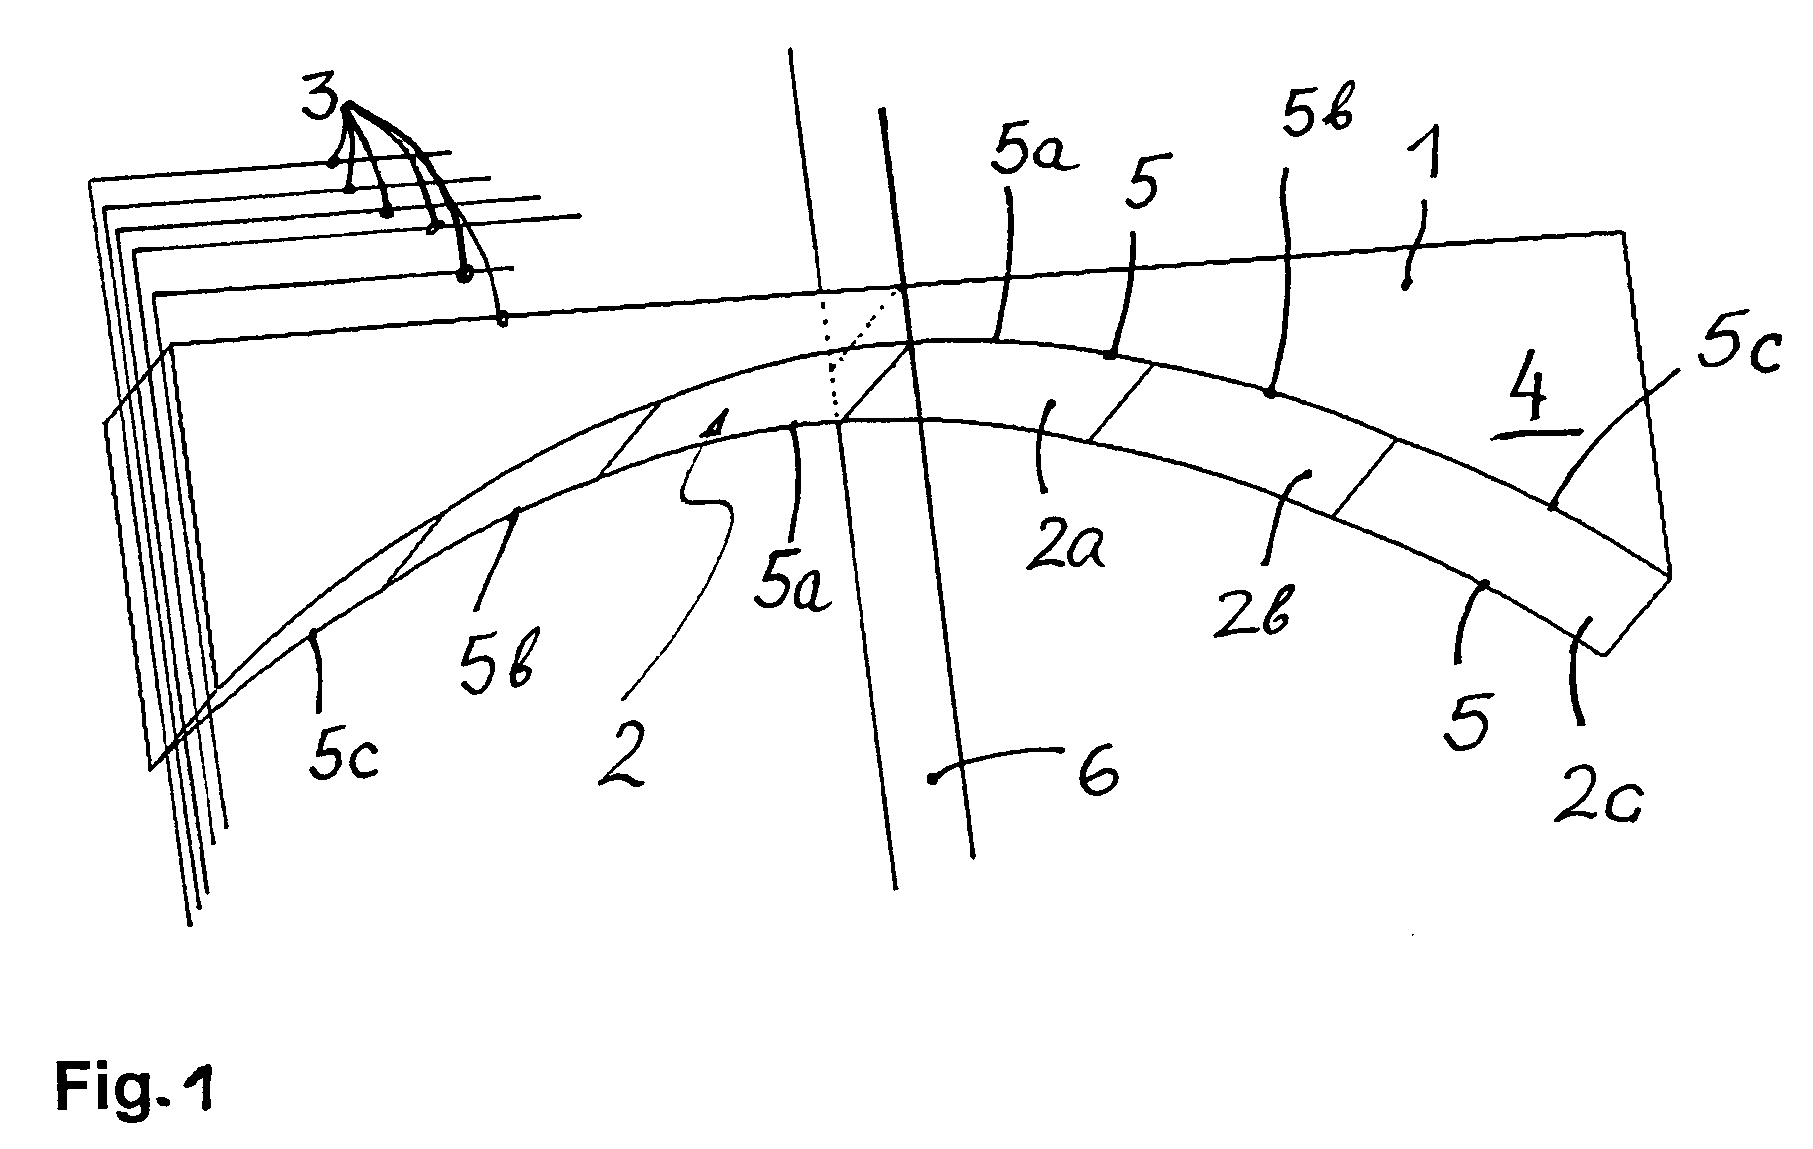 Moulded part for connection to a rim well of a wheel and rim well which is connected to a moulded part